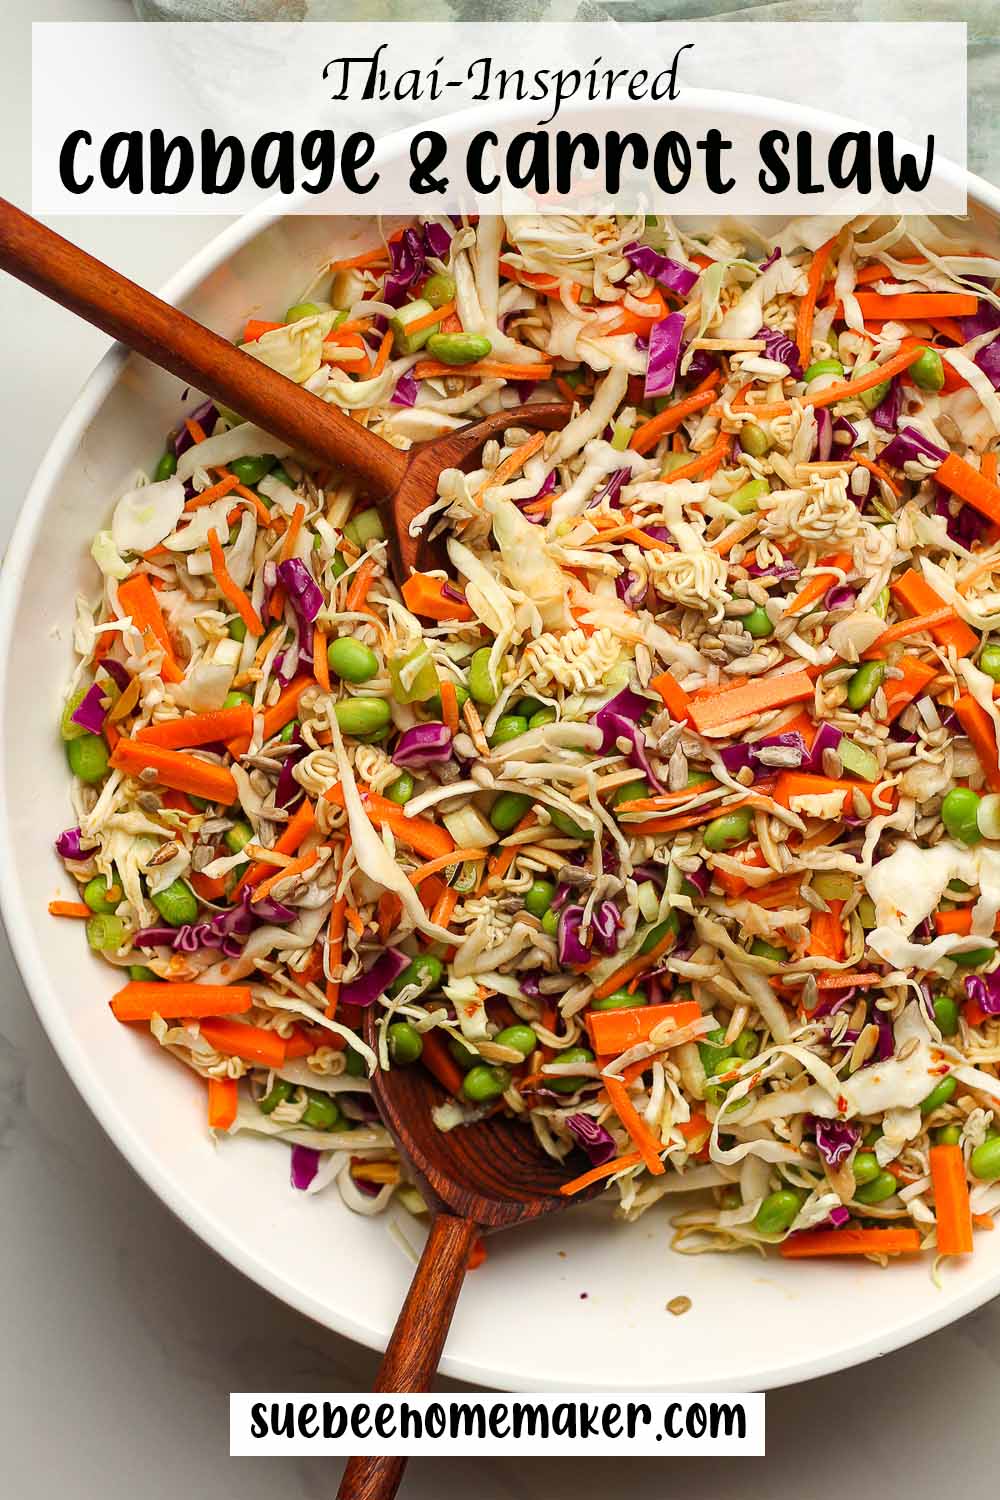 A large bowl of Thai Inspired cabbage and carrot slaw.